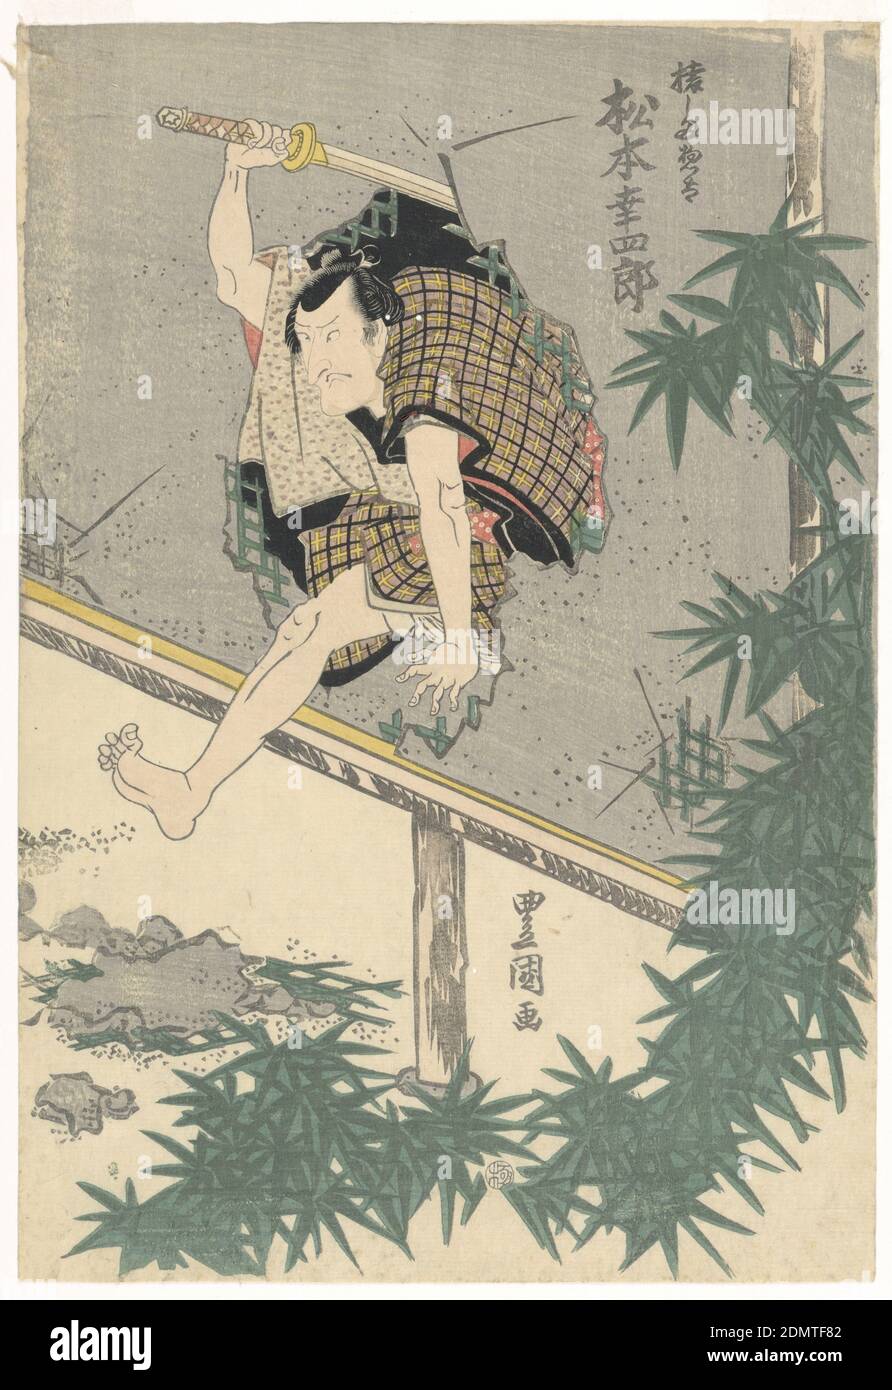 Matsumoto Koshiro leaping through a wall, Woodblock print in colored ink on paper, An animated samurai, Matsumoto Koshiro is leaping through a hole in a wall with his sword in mid-swing above his head. Notice how this exhilarating print elegantly framed with bamboo leaves complements the organic shape of the punched hole., Japan, ca. 1835, theater, Print Stock Photo